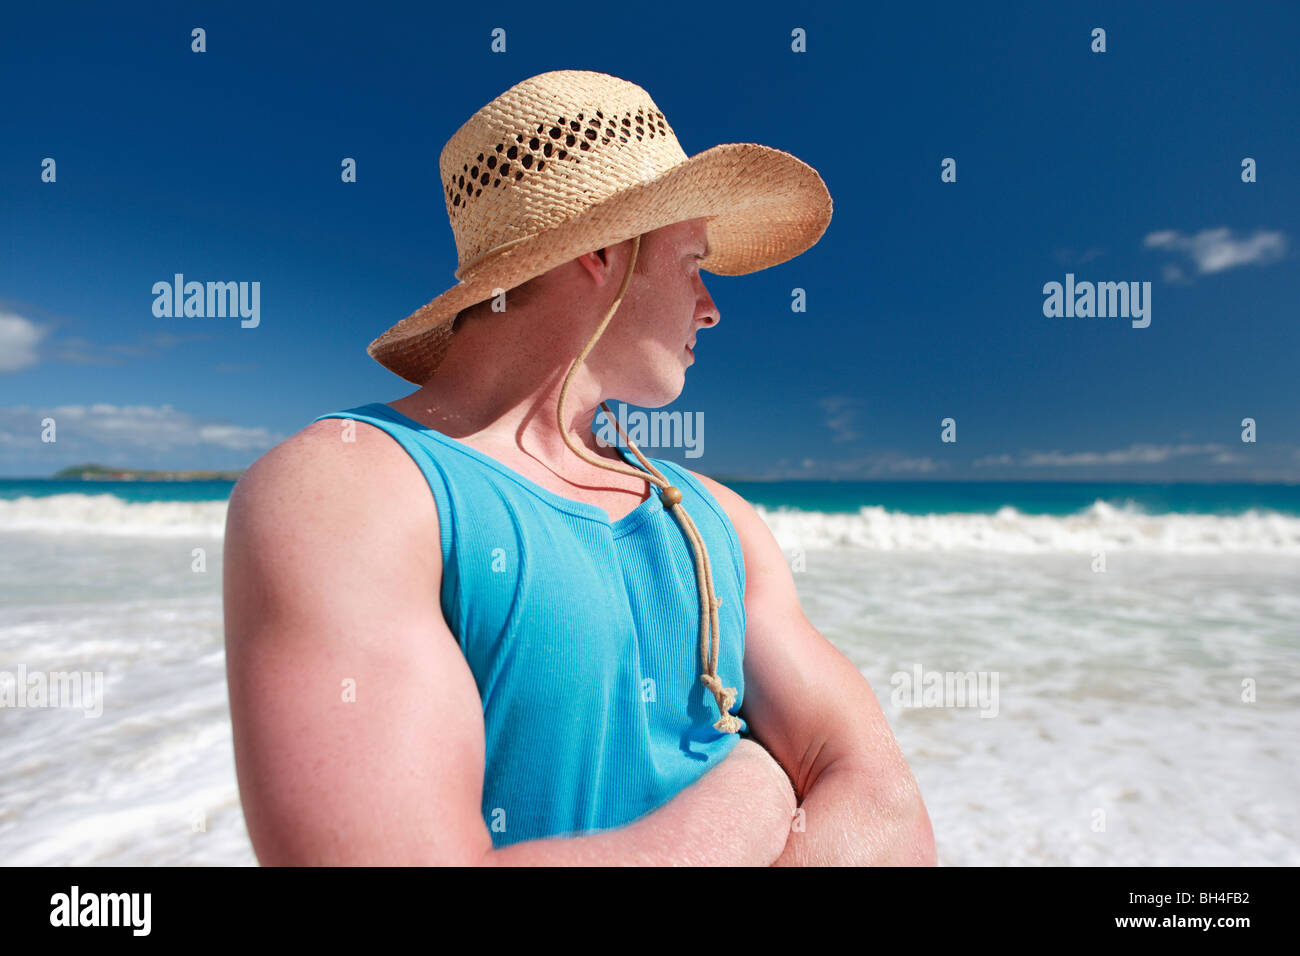 Young man wearing a straw hat looking towards the sea on a tropical beach Stock Photo